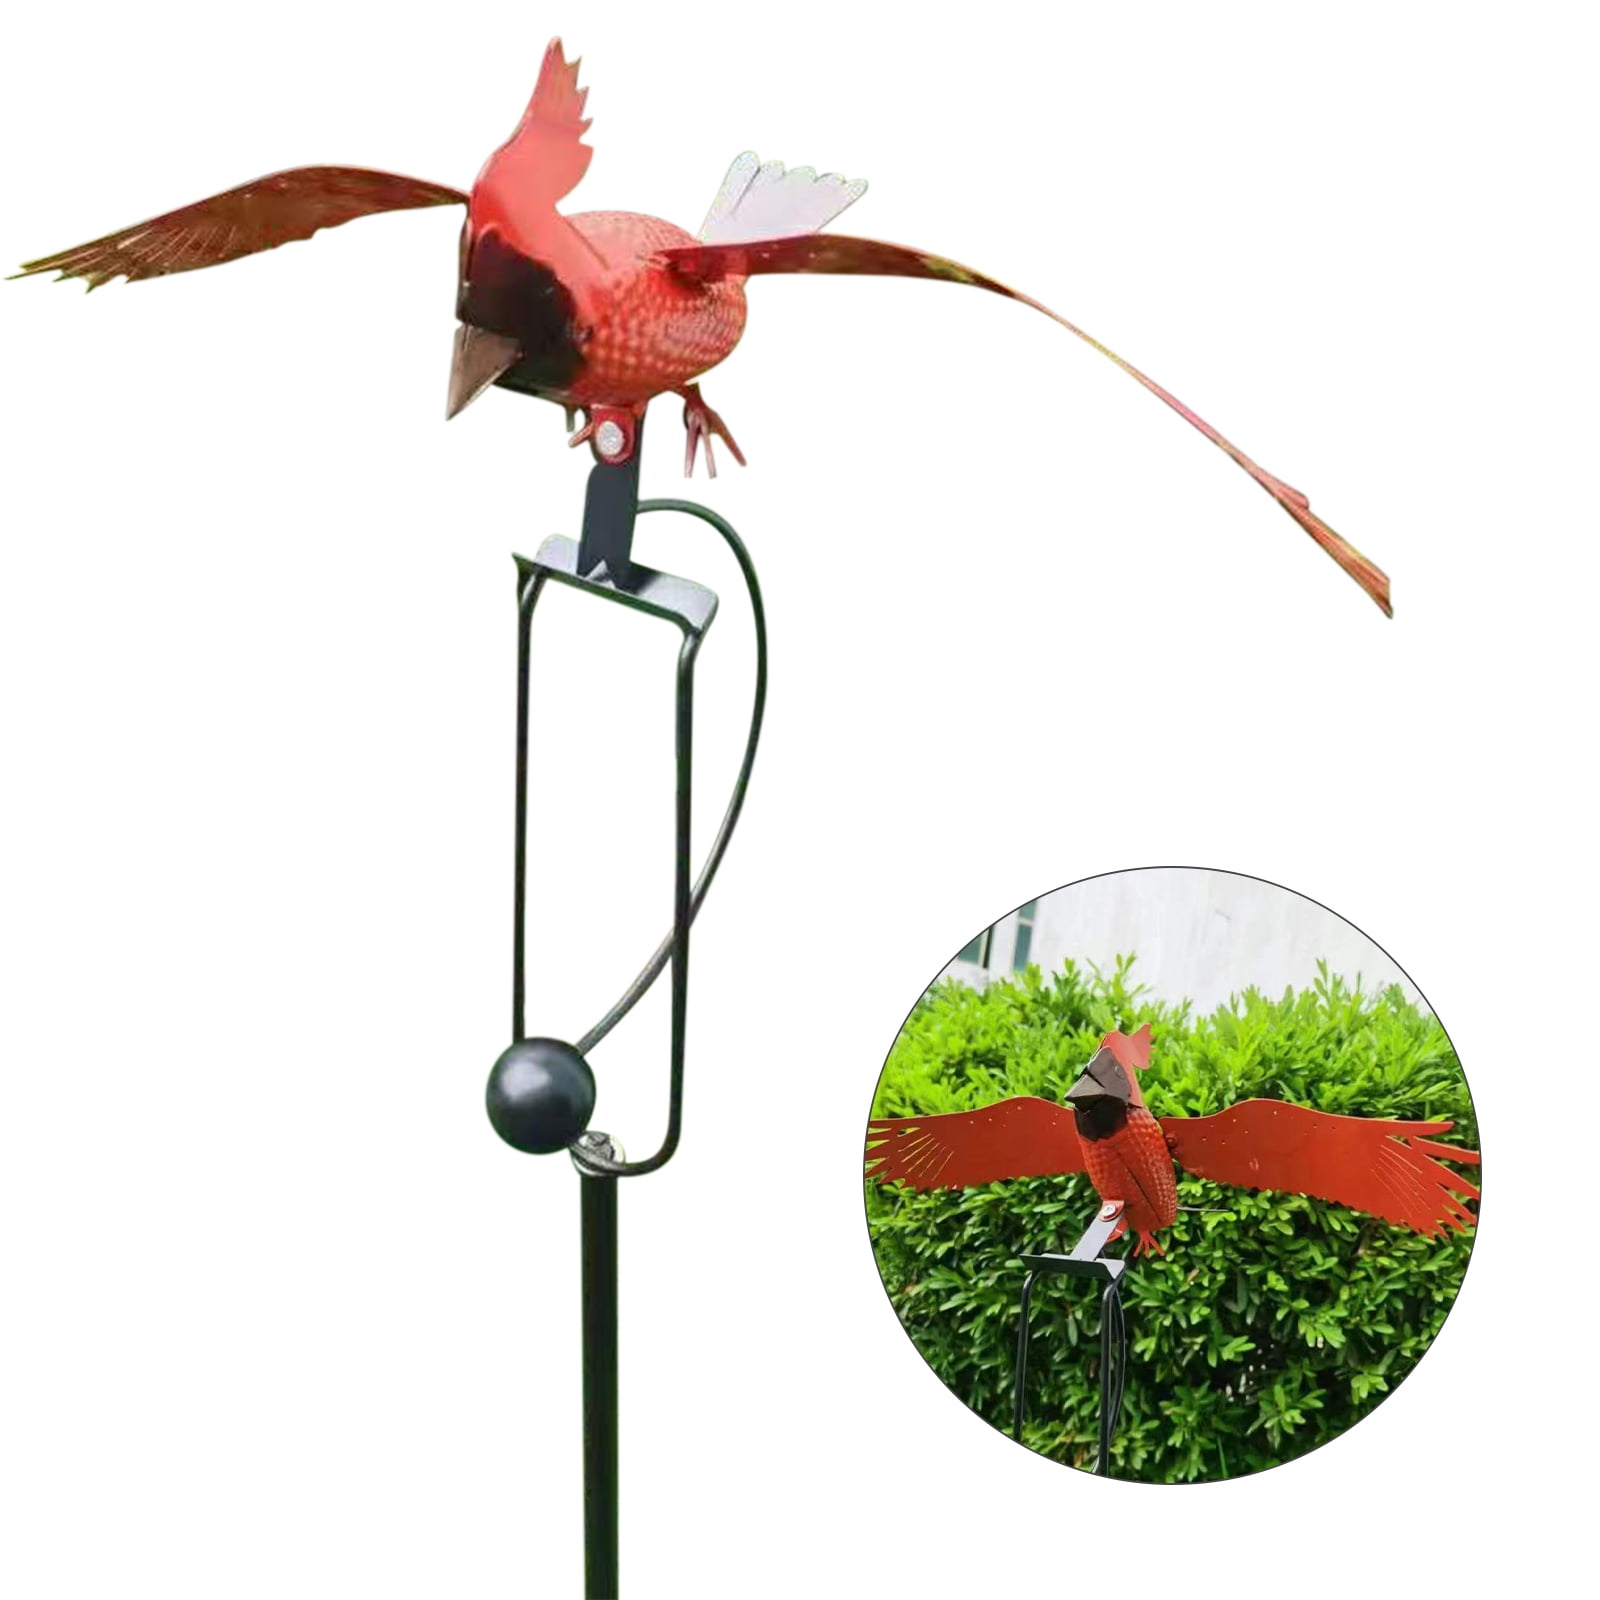 Large Decorative Wind Spinners with Hanging Hook Homarden Metal Garden Bird Wind Spinner Red Cardinal Yard and Lawn Art Decorations 6 x 6 Inch 3D Stainless Steel Outdoor Cardinal Yard Spinner 